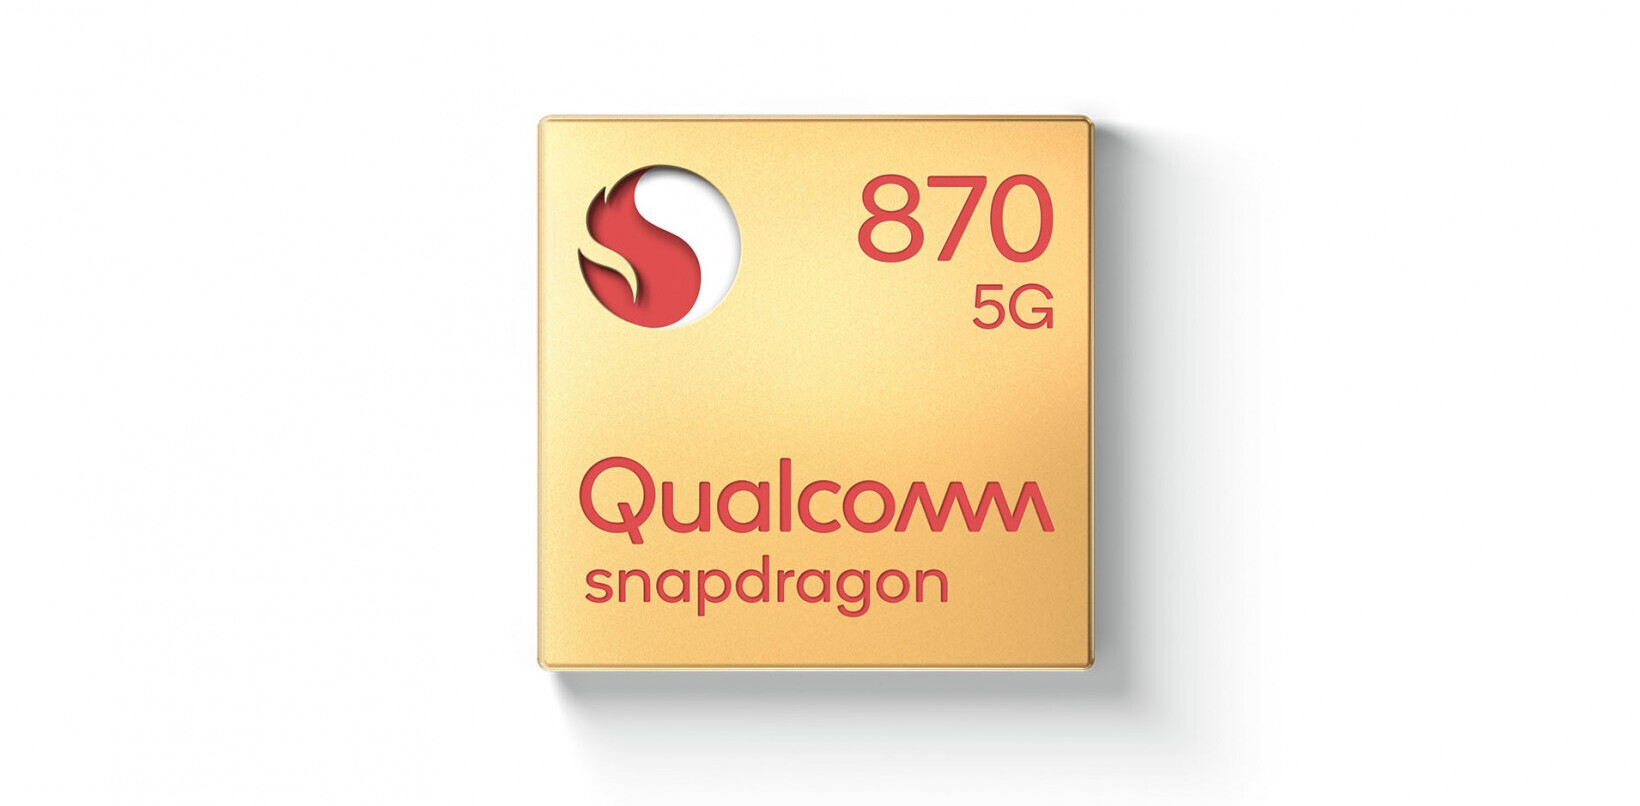 Qualcomm’s new Snapdragon 870 is an ‘almost-flagship’ chip for Android phones